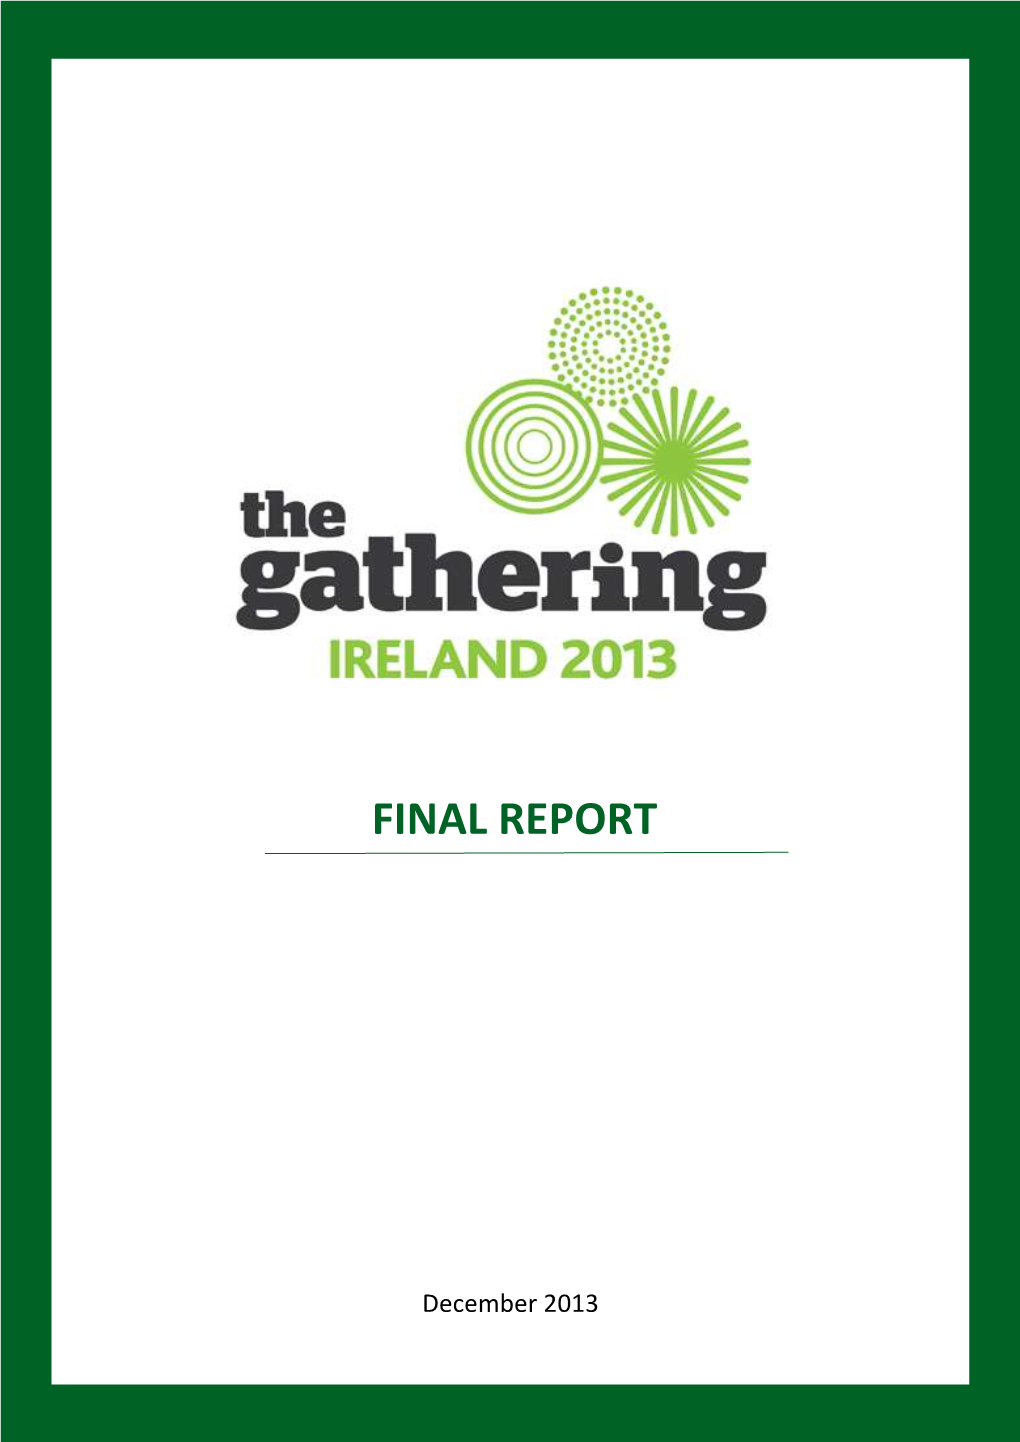 The Gathering Ireland 2013 Has Been Described As “The Largest Ever Tourism Initiative” in Ireland